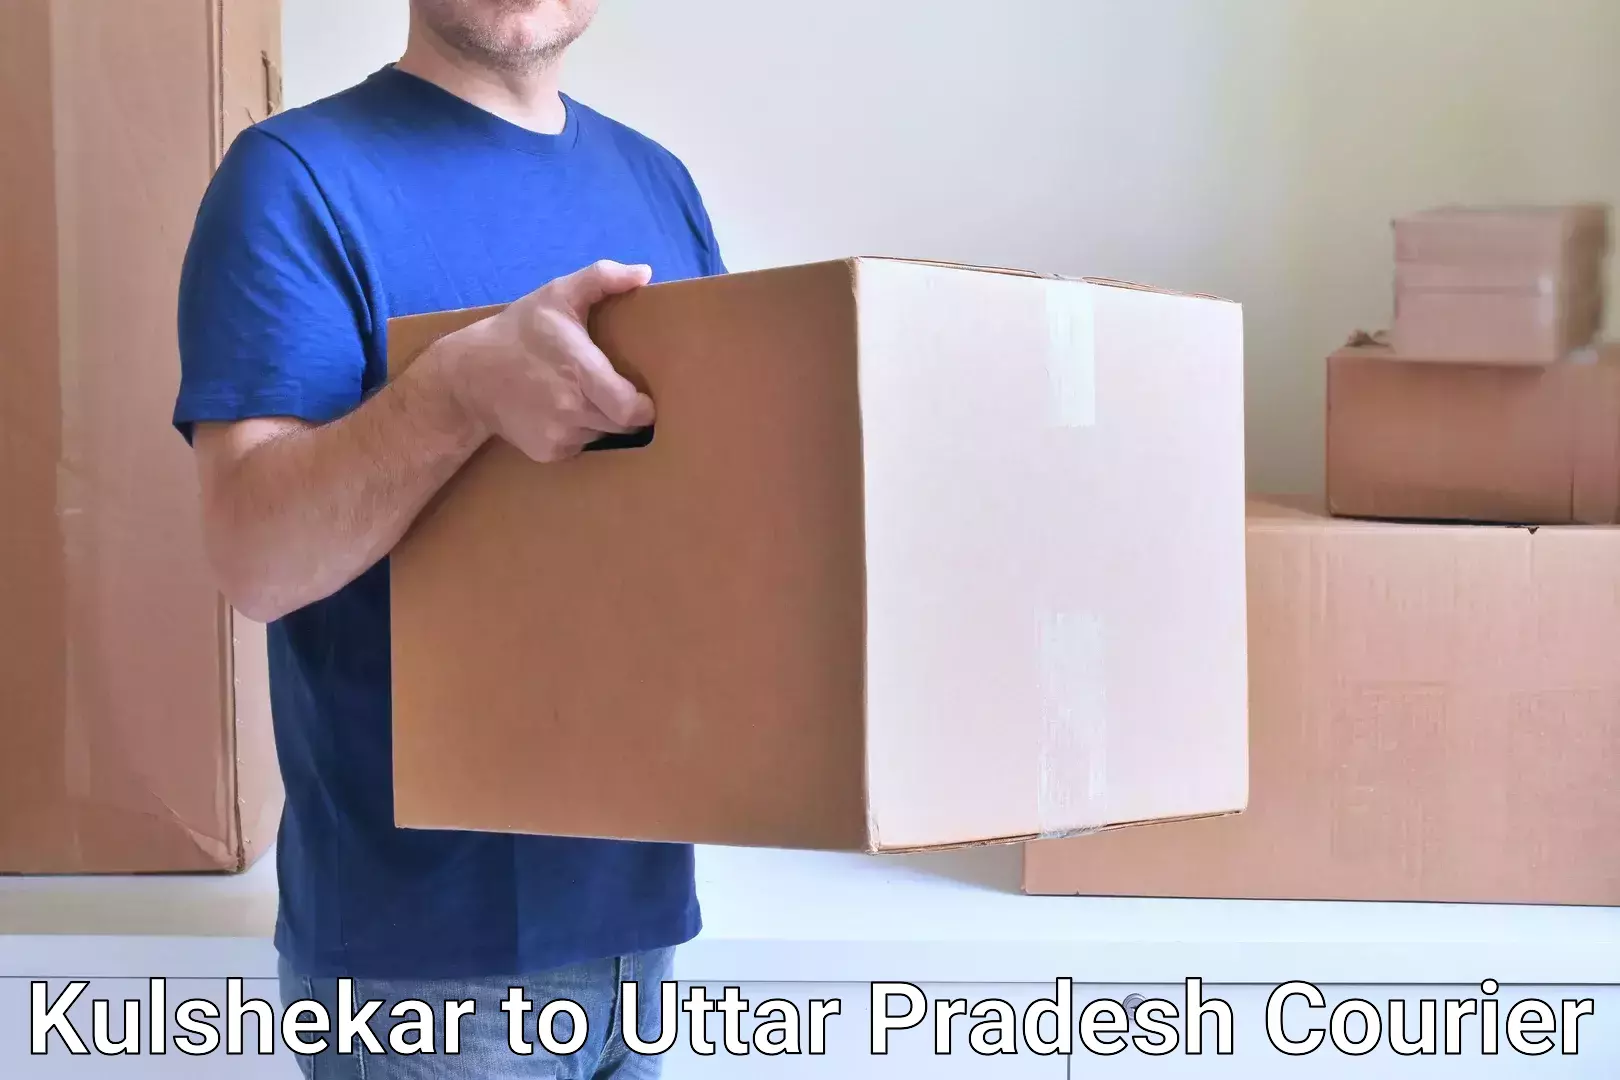 Efficient package consolidation Kulshekar to IIT Kanpur